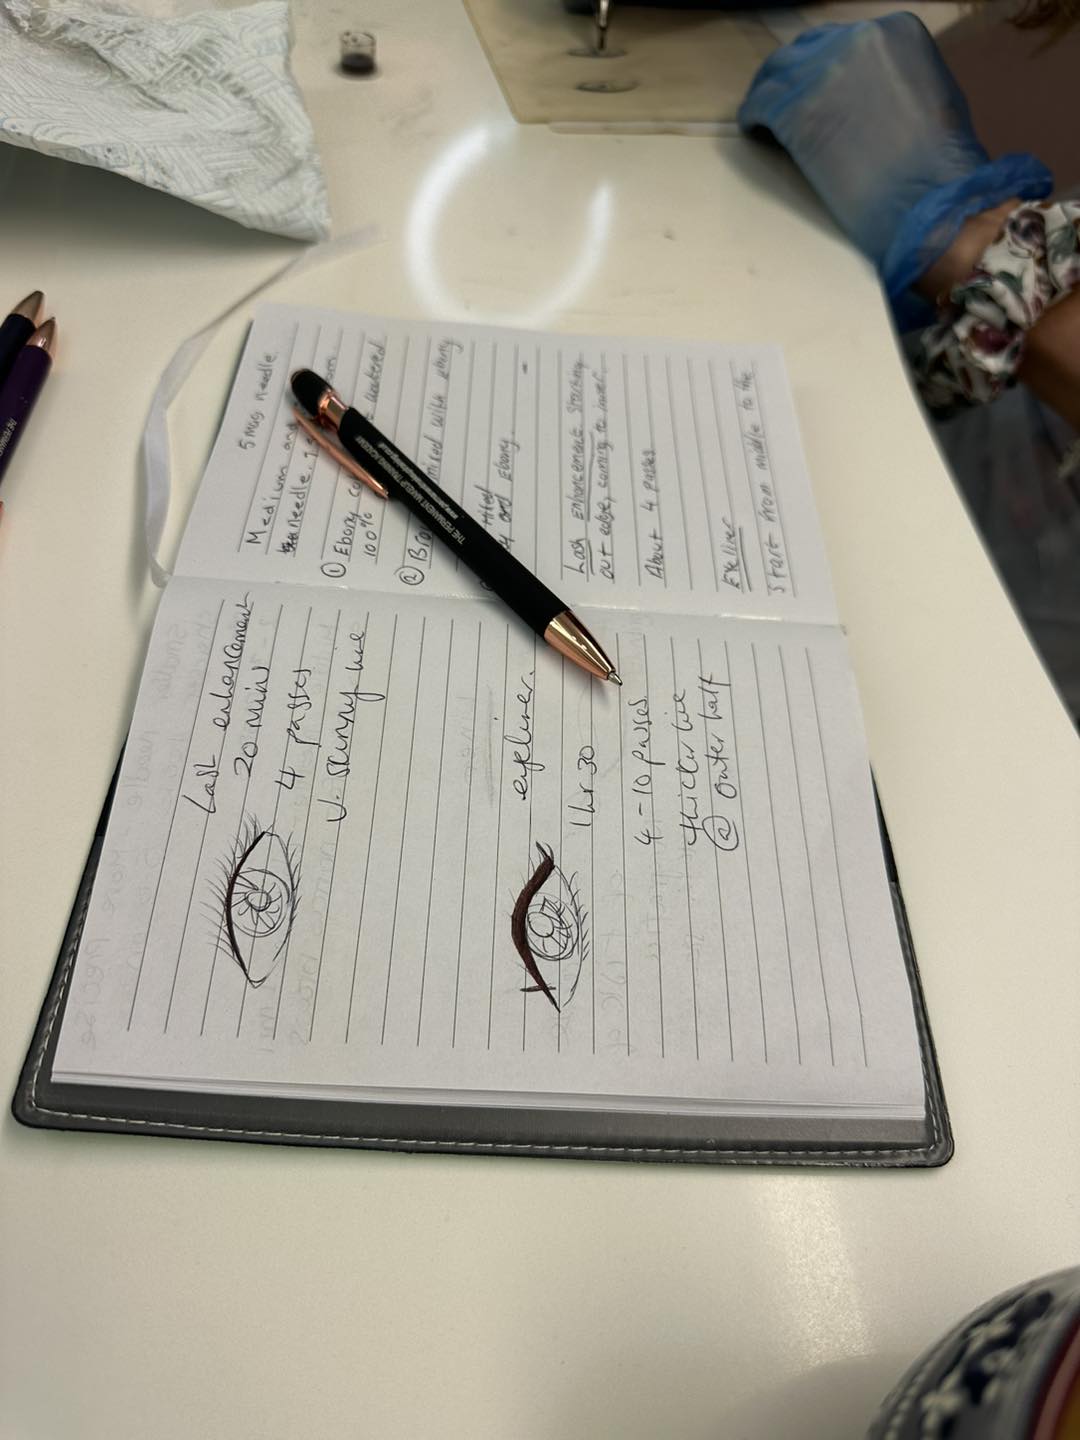 Sharon's notebook from her permanent makeup training